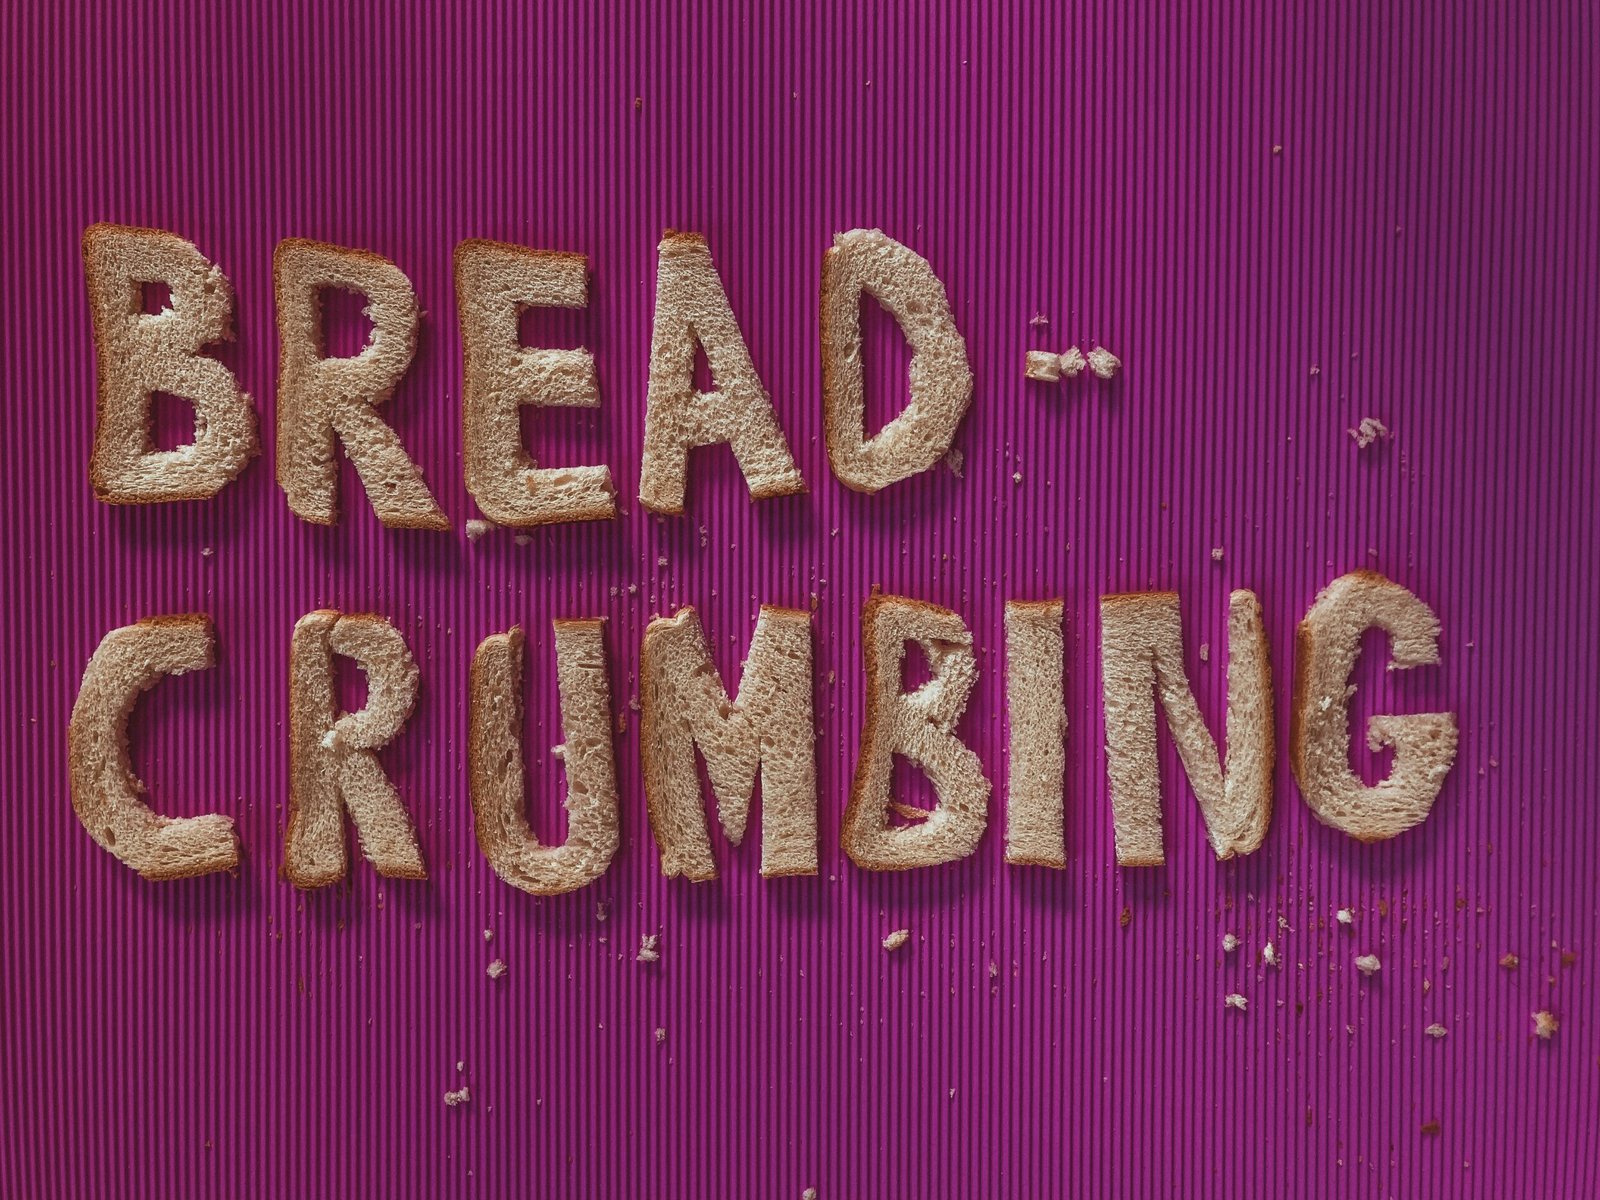 How do I know if someone is Breadcrumbing me?